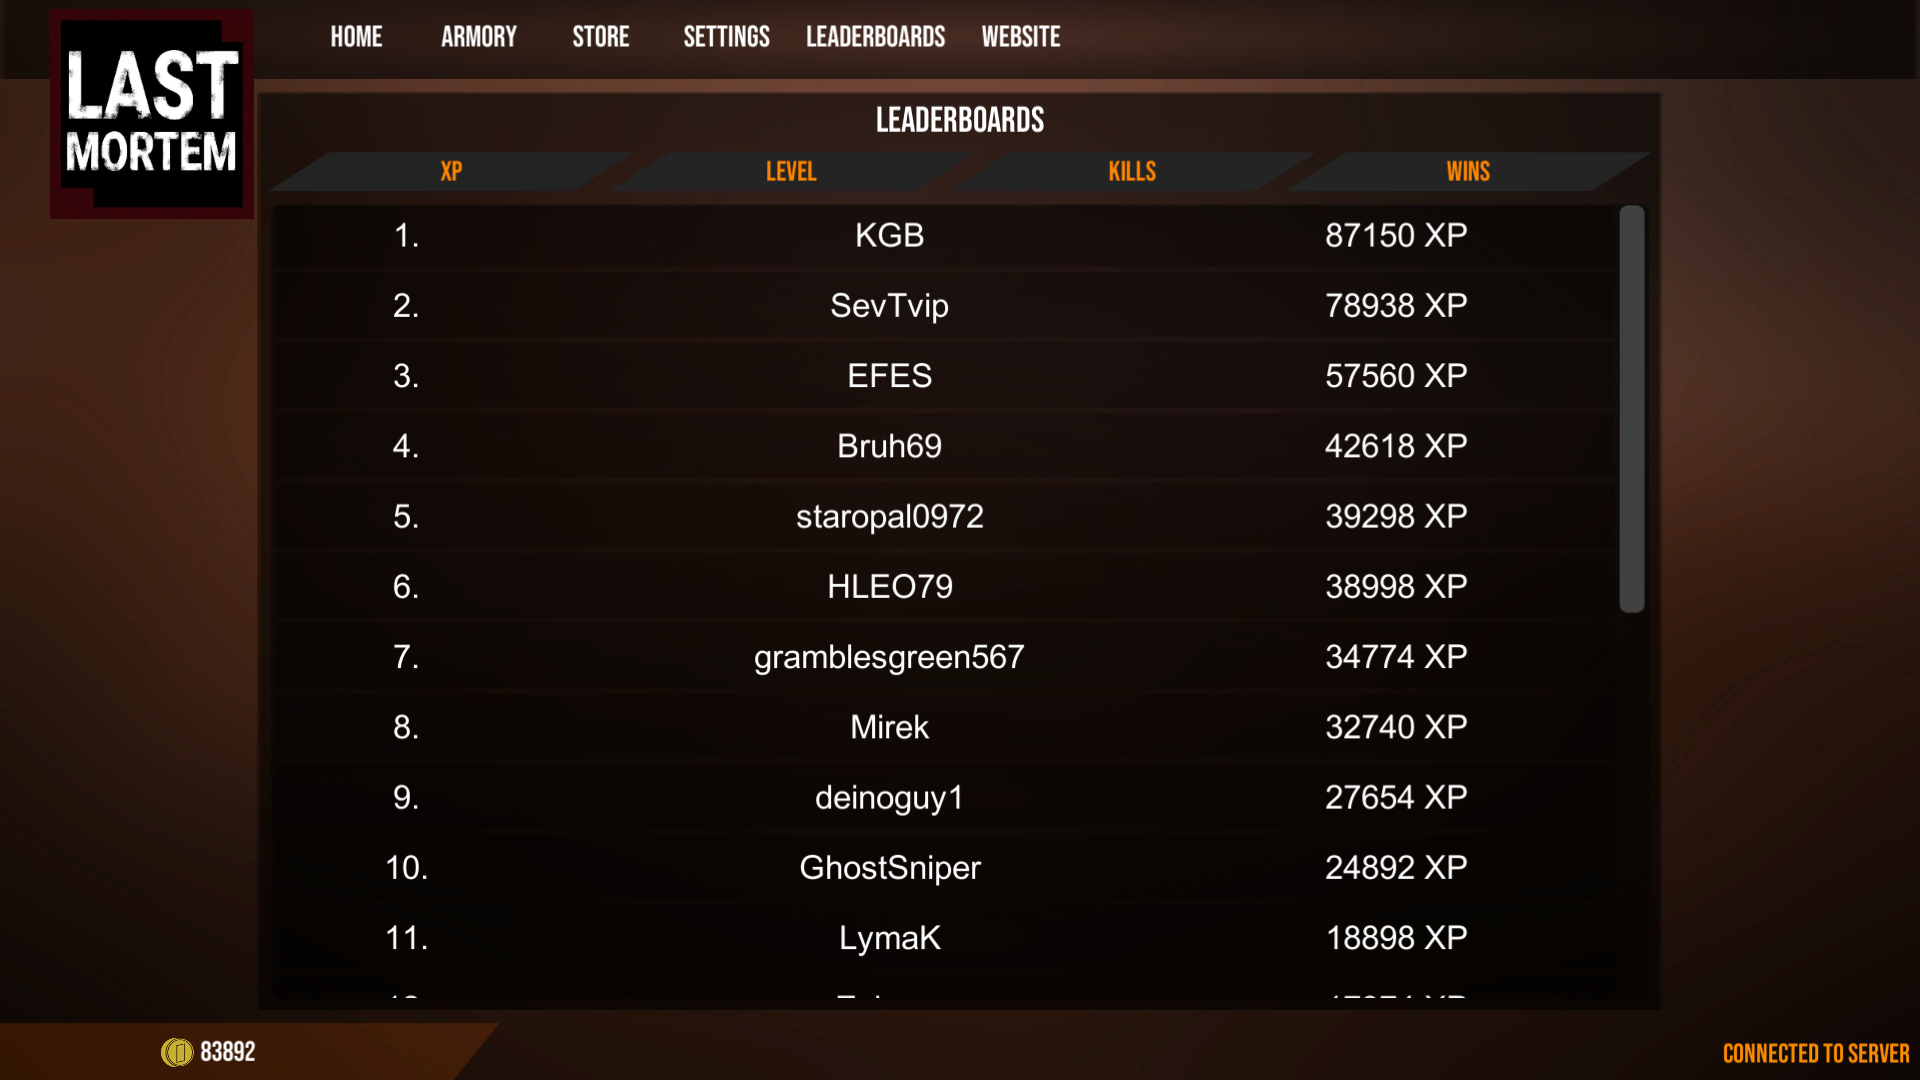 New Leaderboards